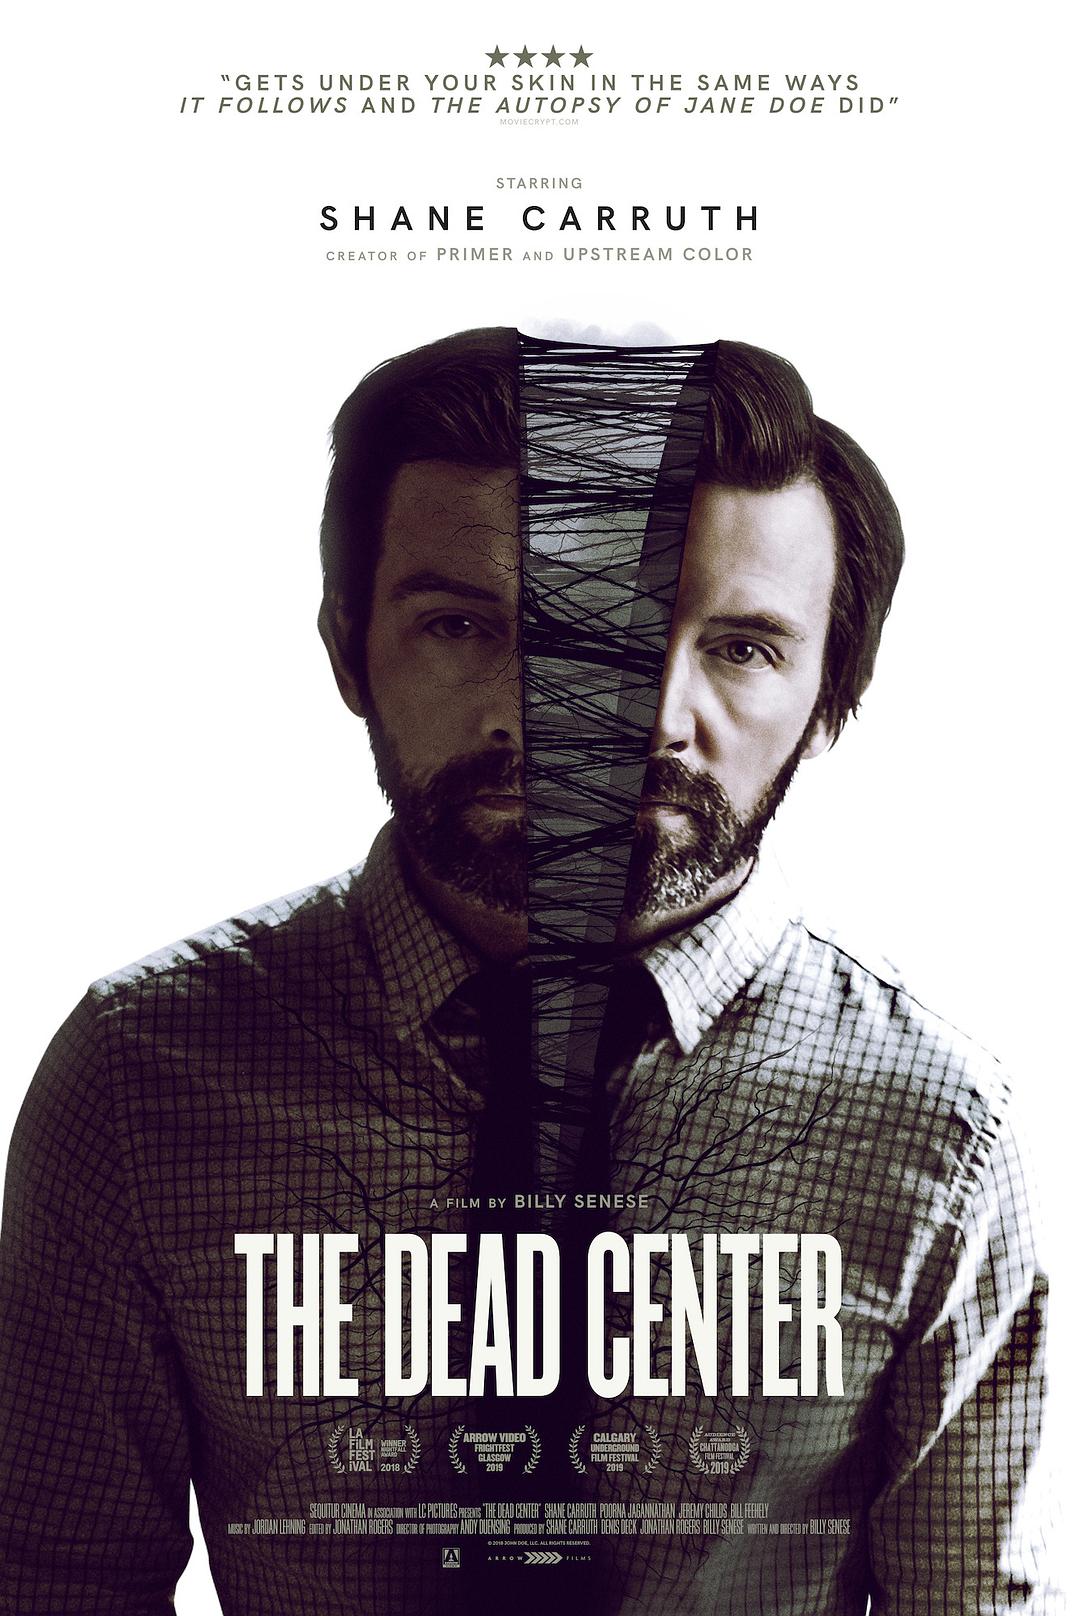  The.Dead.Center.2018.1080p.BluRay.REMUX.AVC.DTS-HD.MA.5.1-FGT 24.85GB-1.png